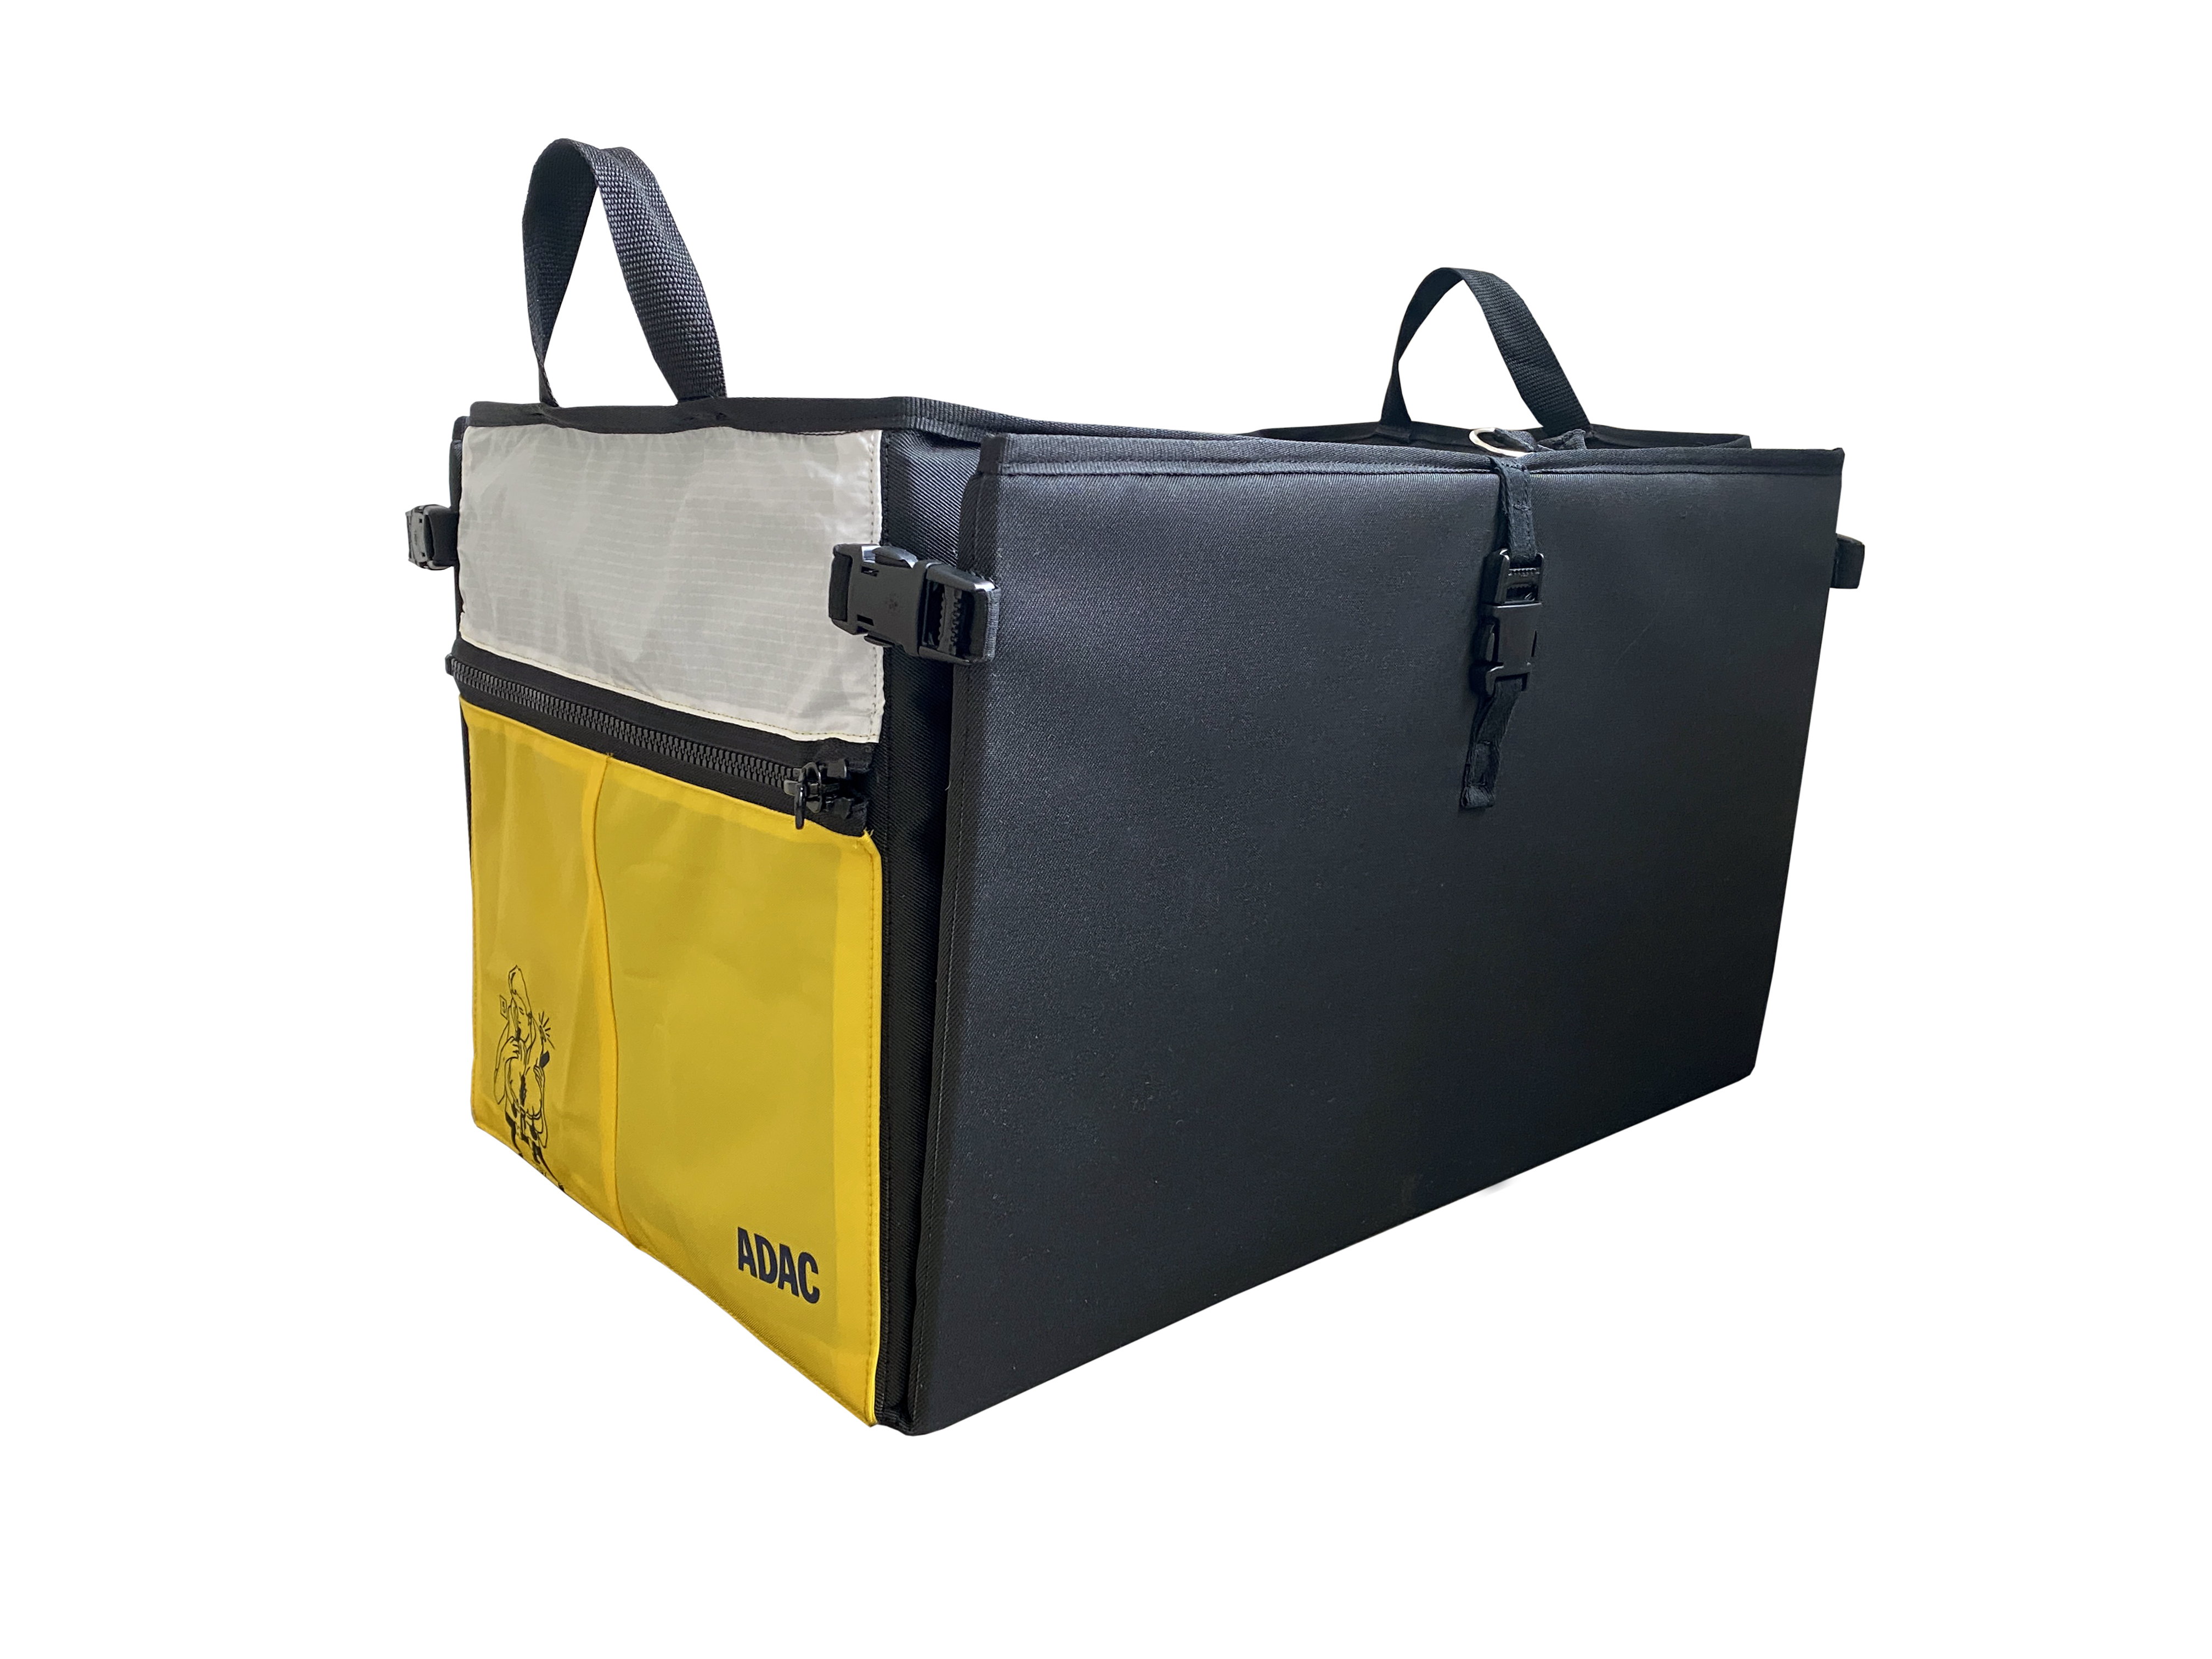 ADAC foldable storage box for the car trunk or camper